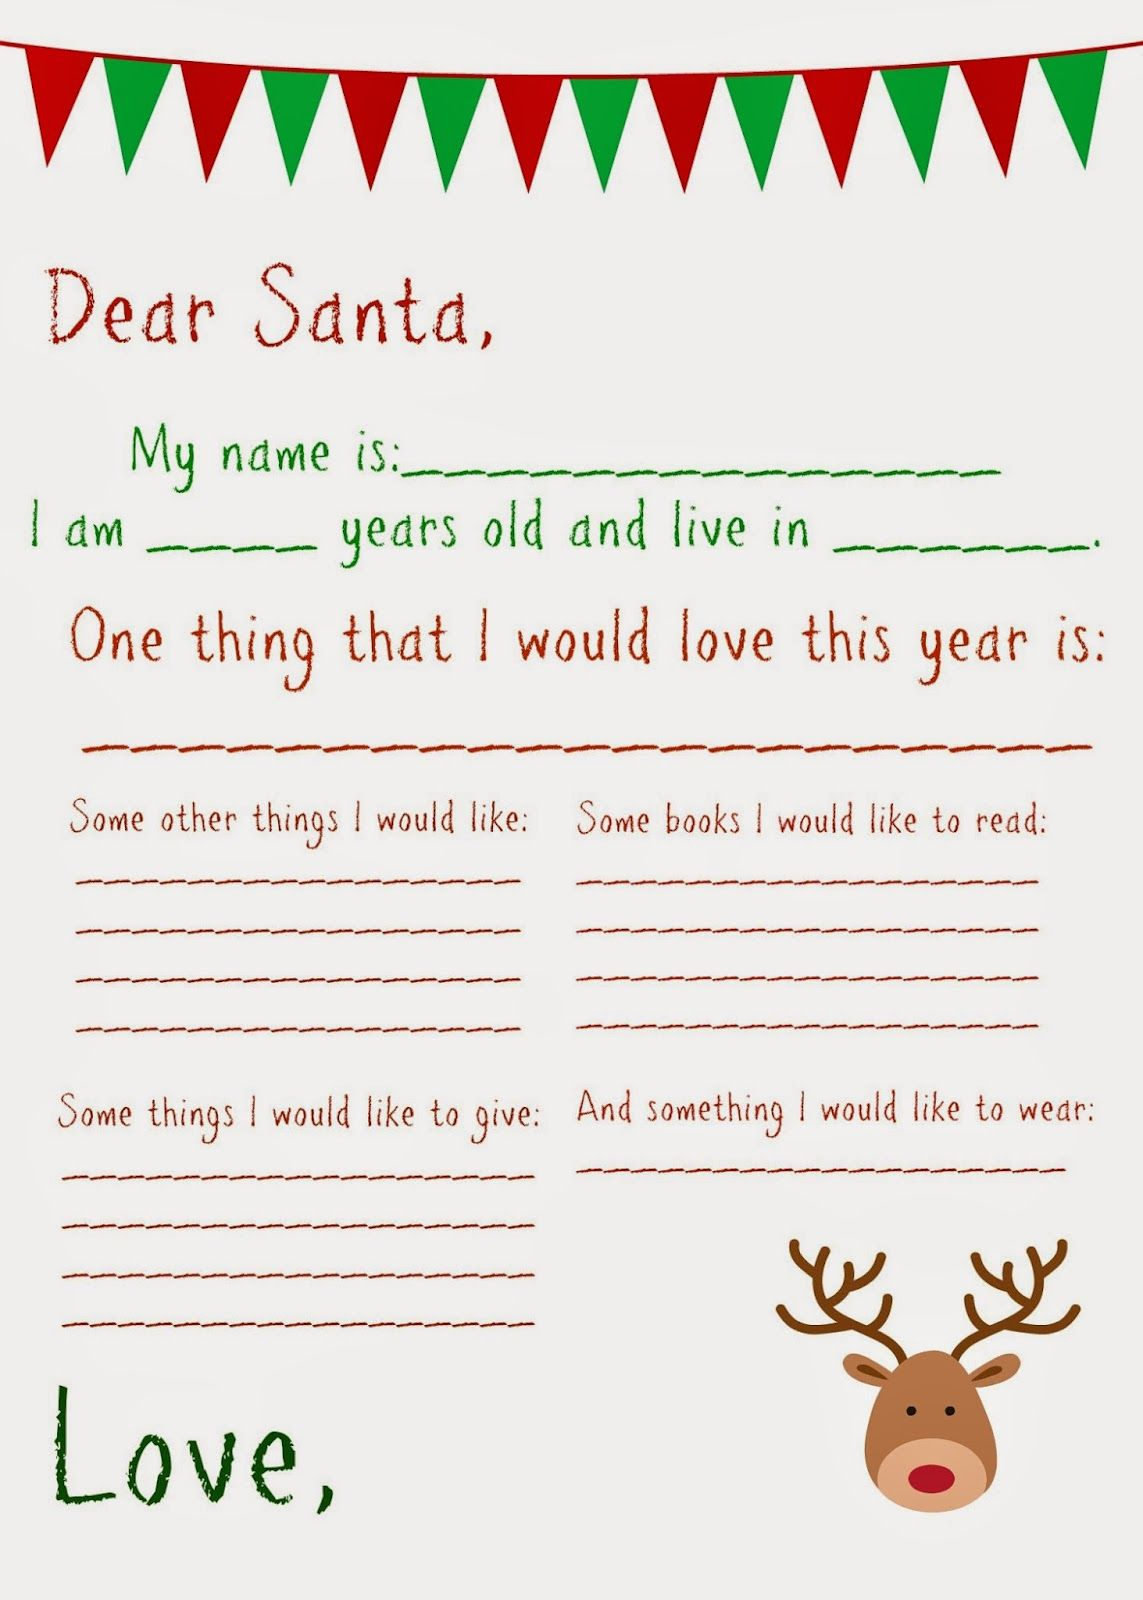 free-personalized-printable-letters-from-santa-claus-free-printable